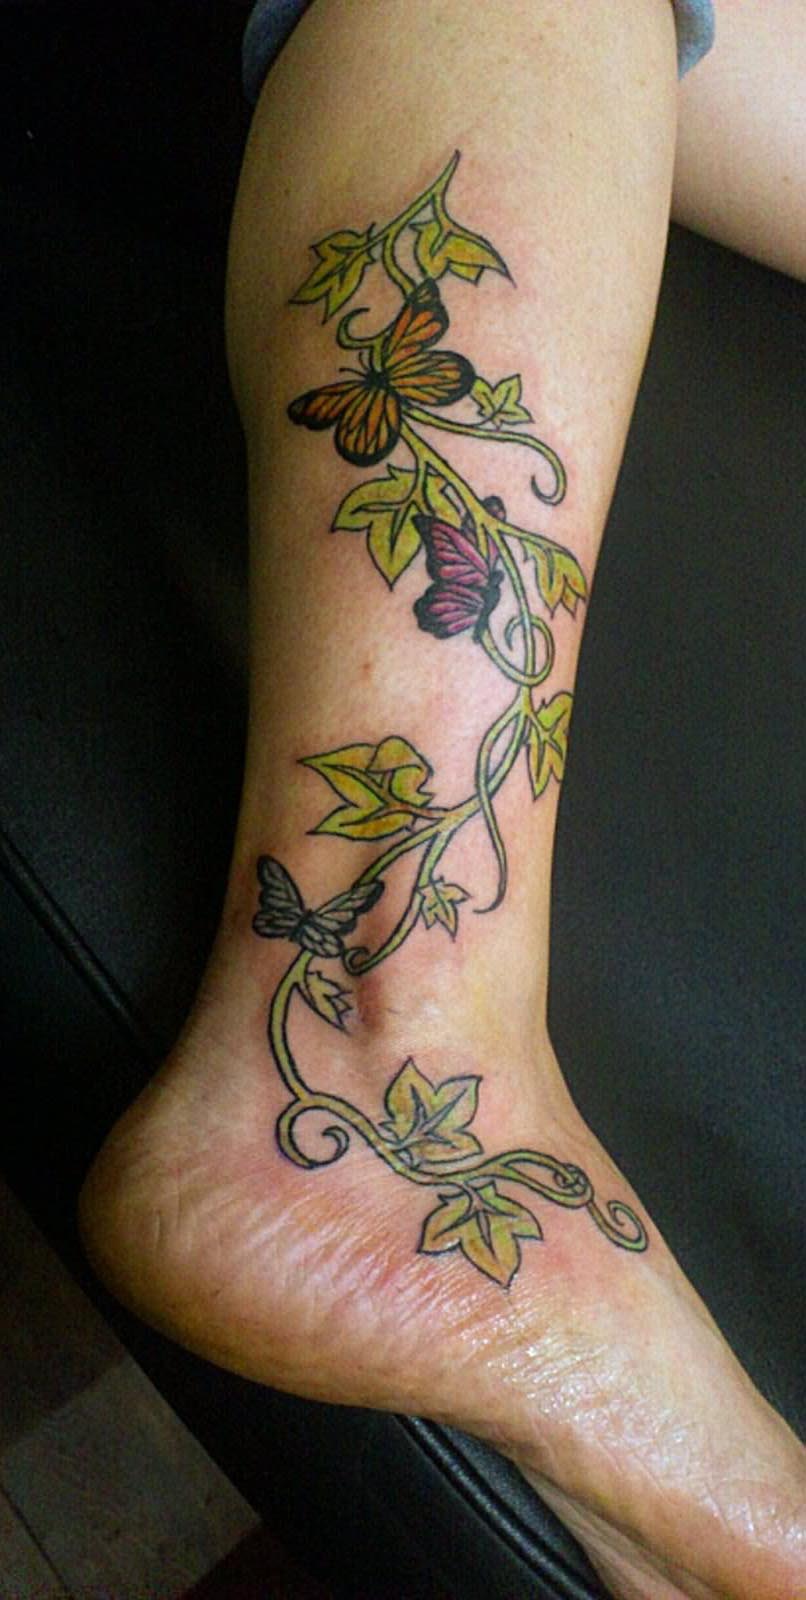 Ivy Vine With Butterflies Tattoo On Right Leg.